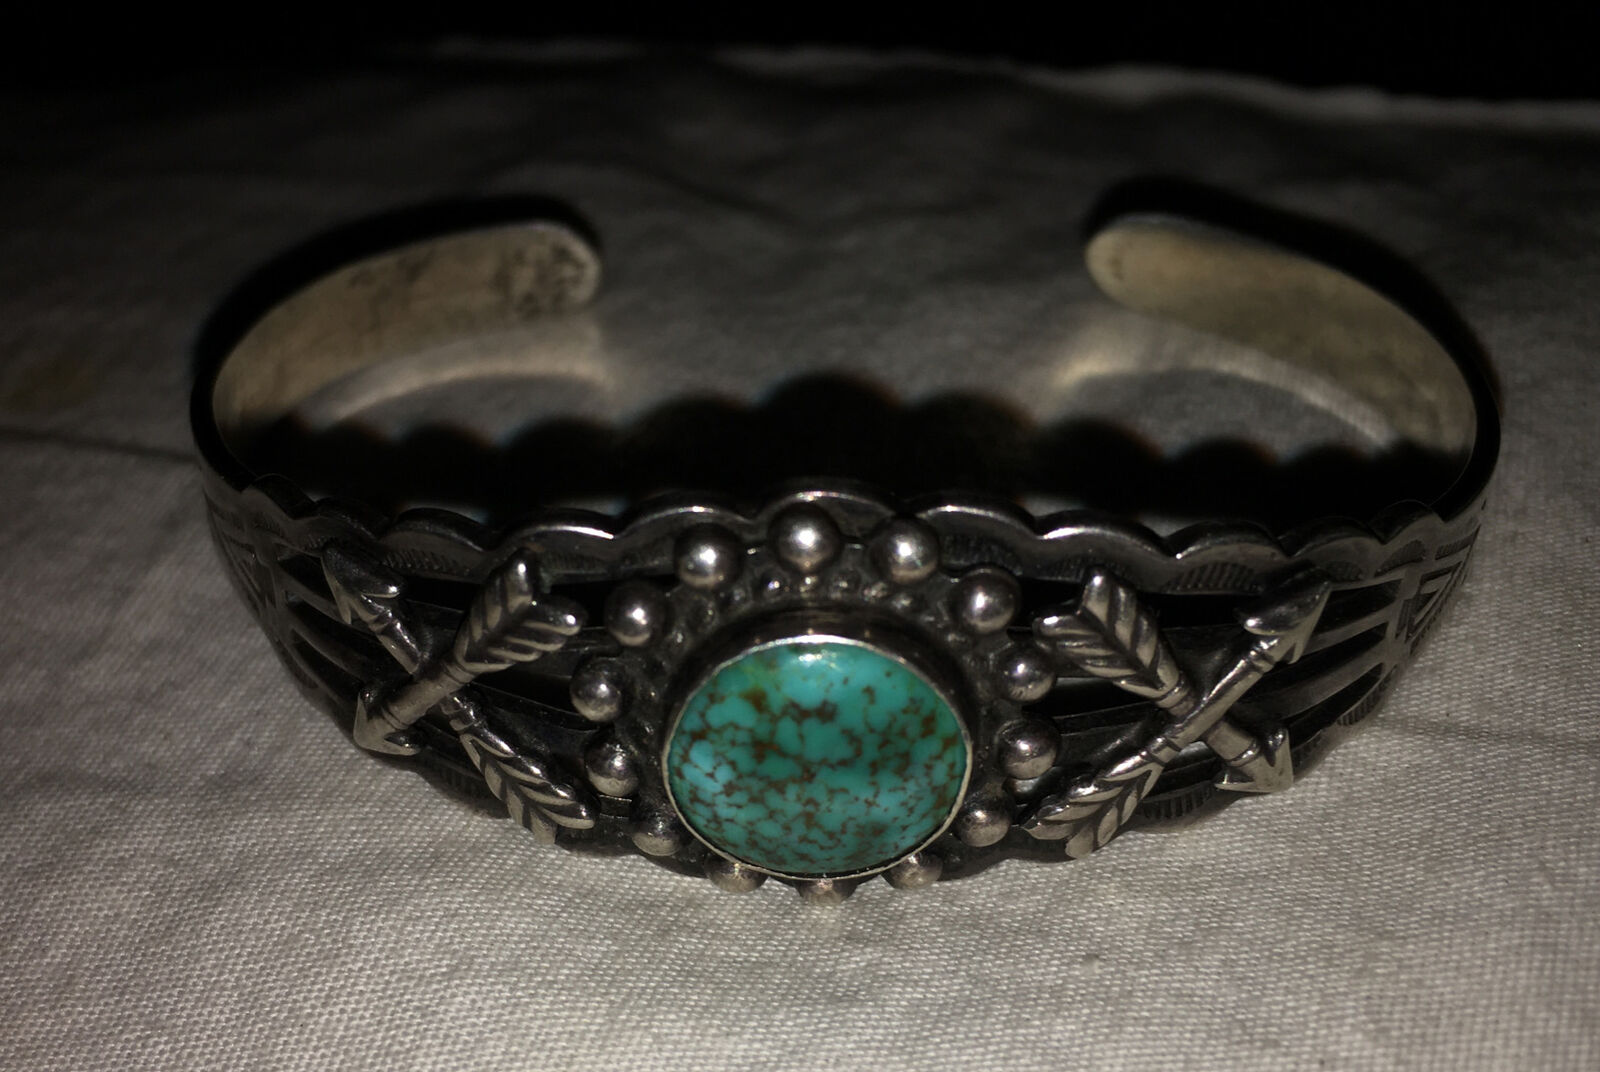 Vintage "maisel"s Trading Post" Turquoise & Sterling Silver Cuff Bracelet